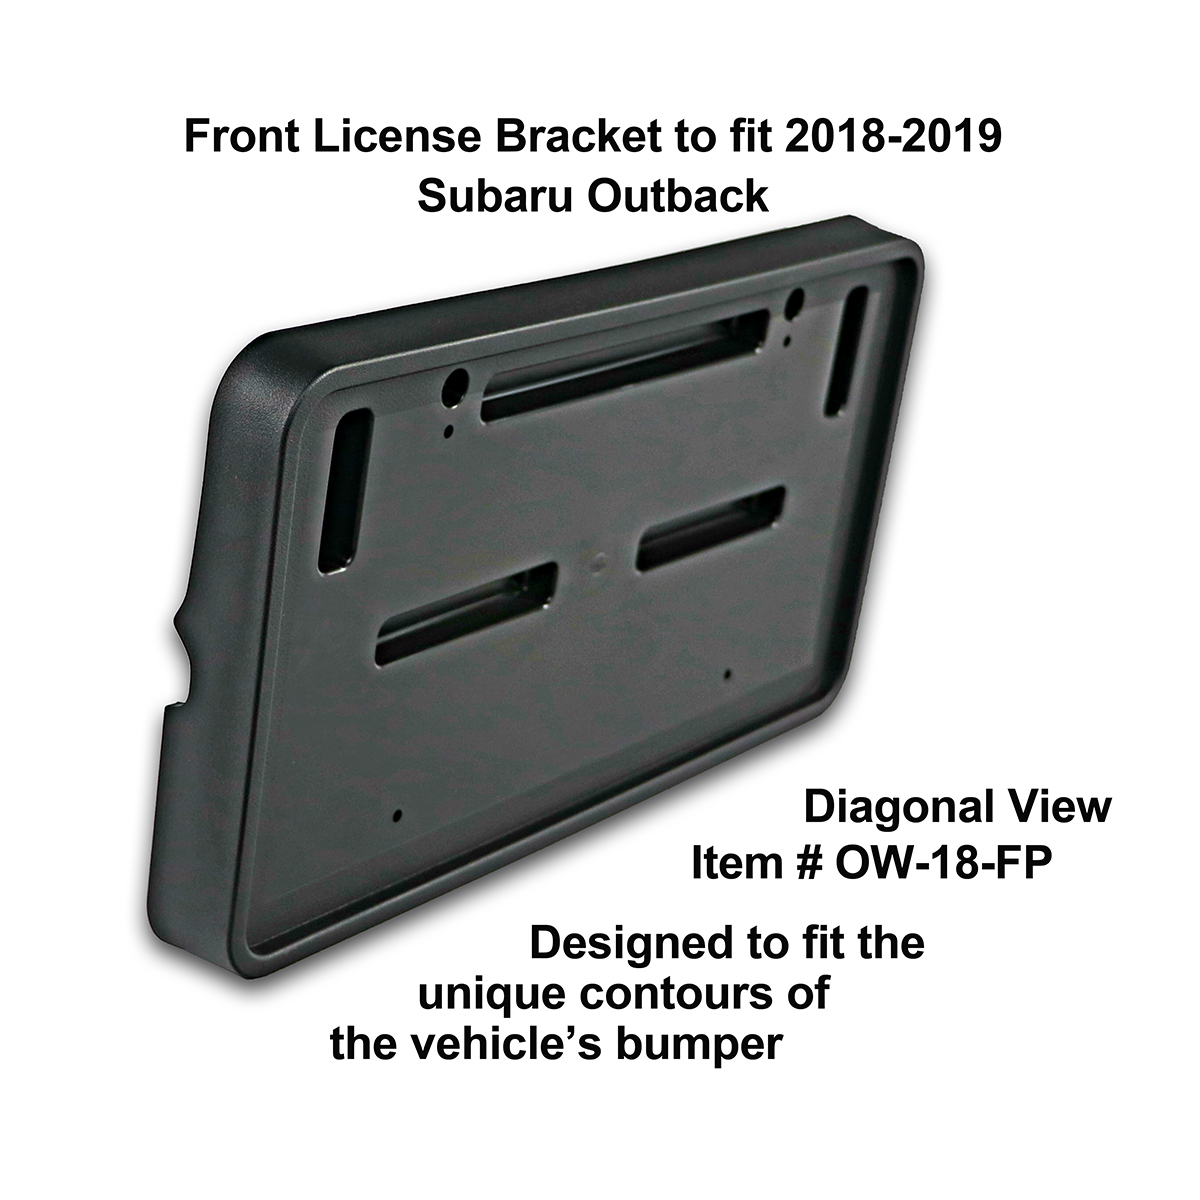 Front and Rear License Plate Frame/Bracket Assembly to fit 2018-2019 Subaru Outback Wagon ON 2019 Subaru Outback Front License Plate Bracket